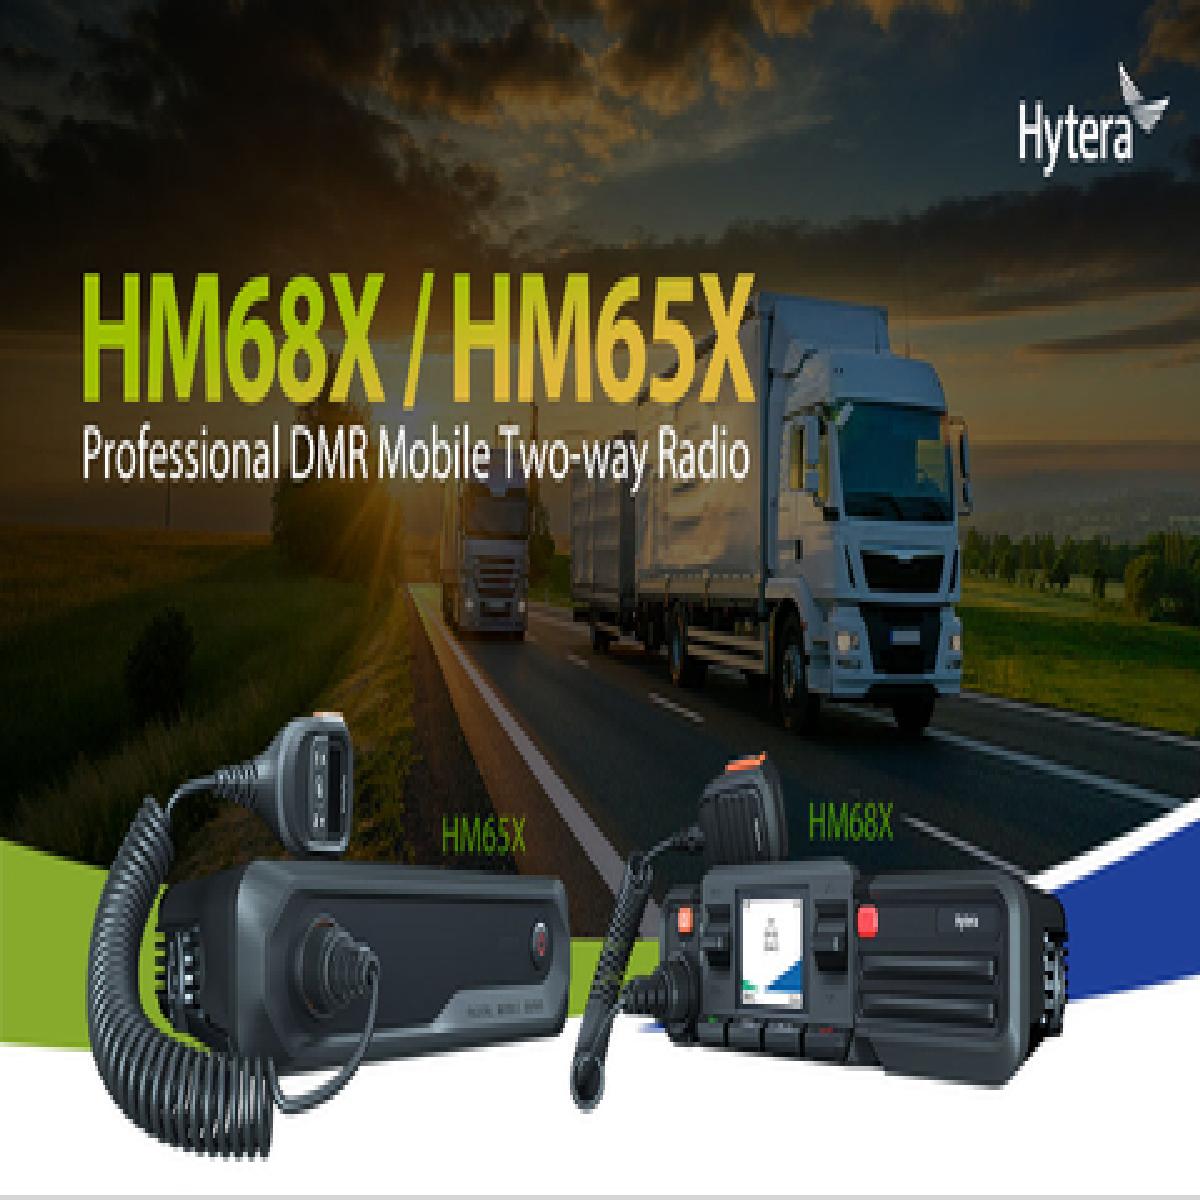 Hytera Launches HM6 Series DMR Mobile Radios to Empower Workforce on the Road